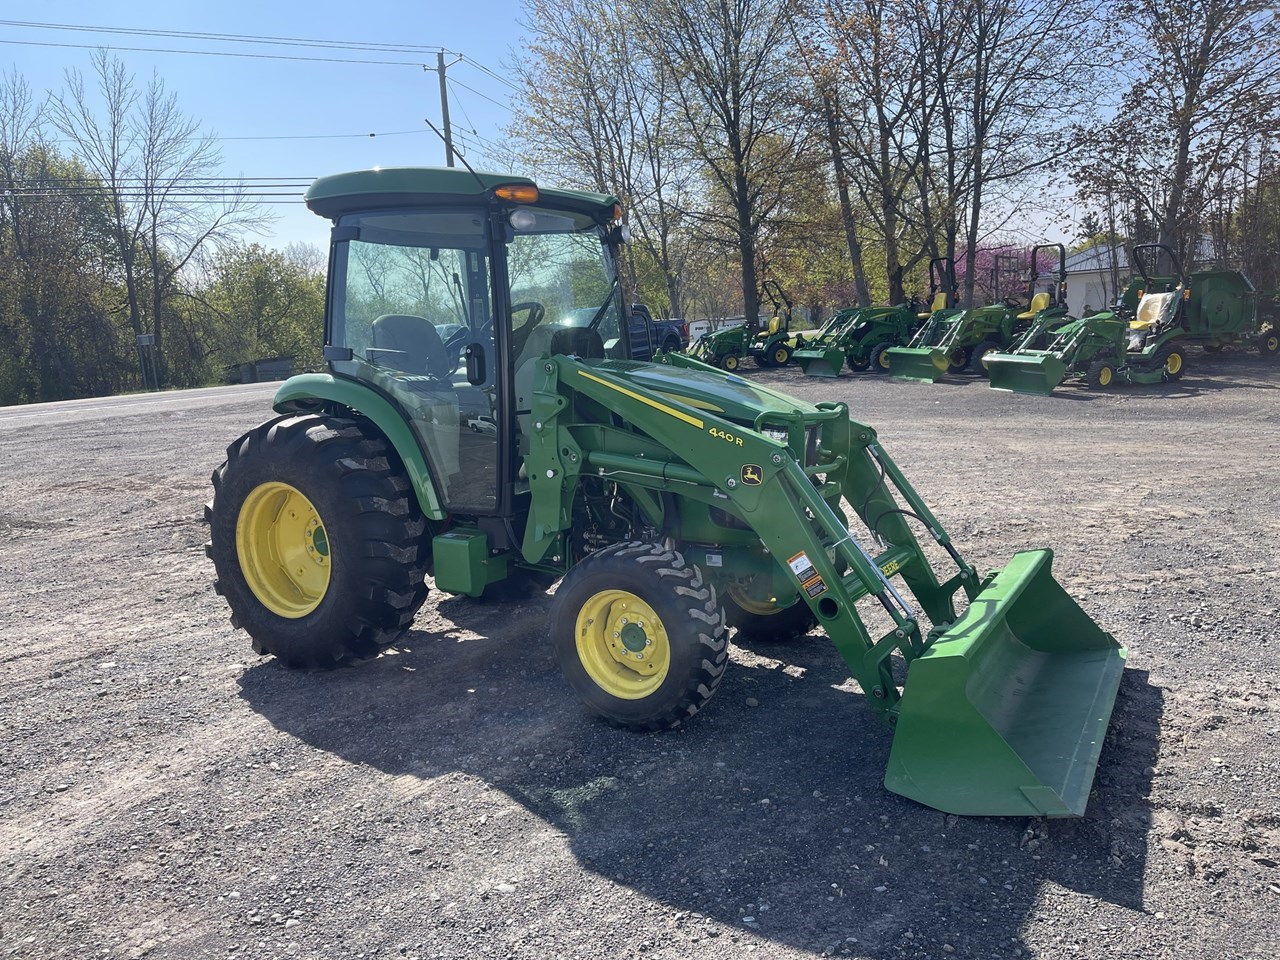 2017 John Deere 4052R Tractor - Compact Utility For Sale